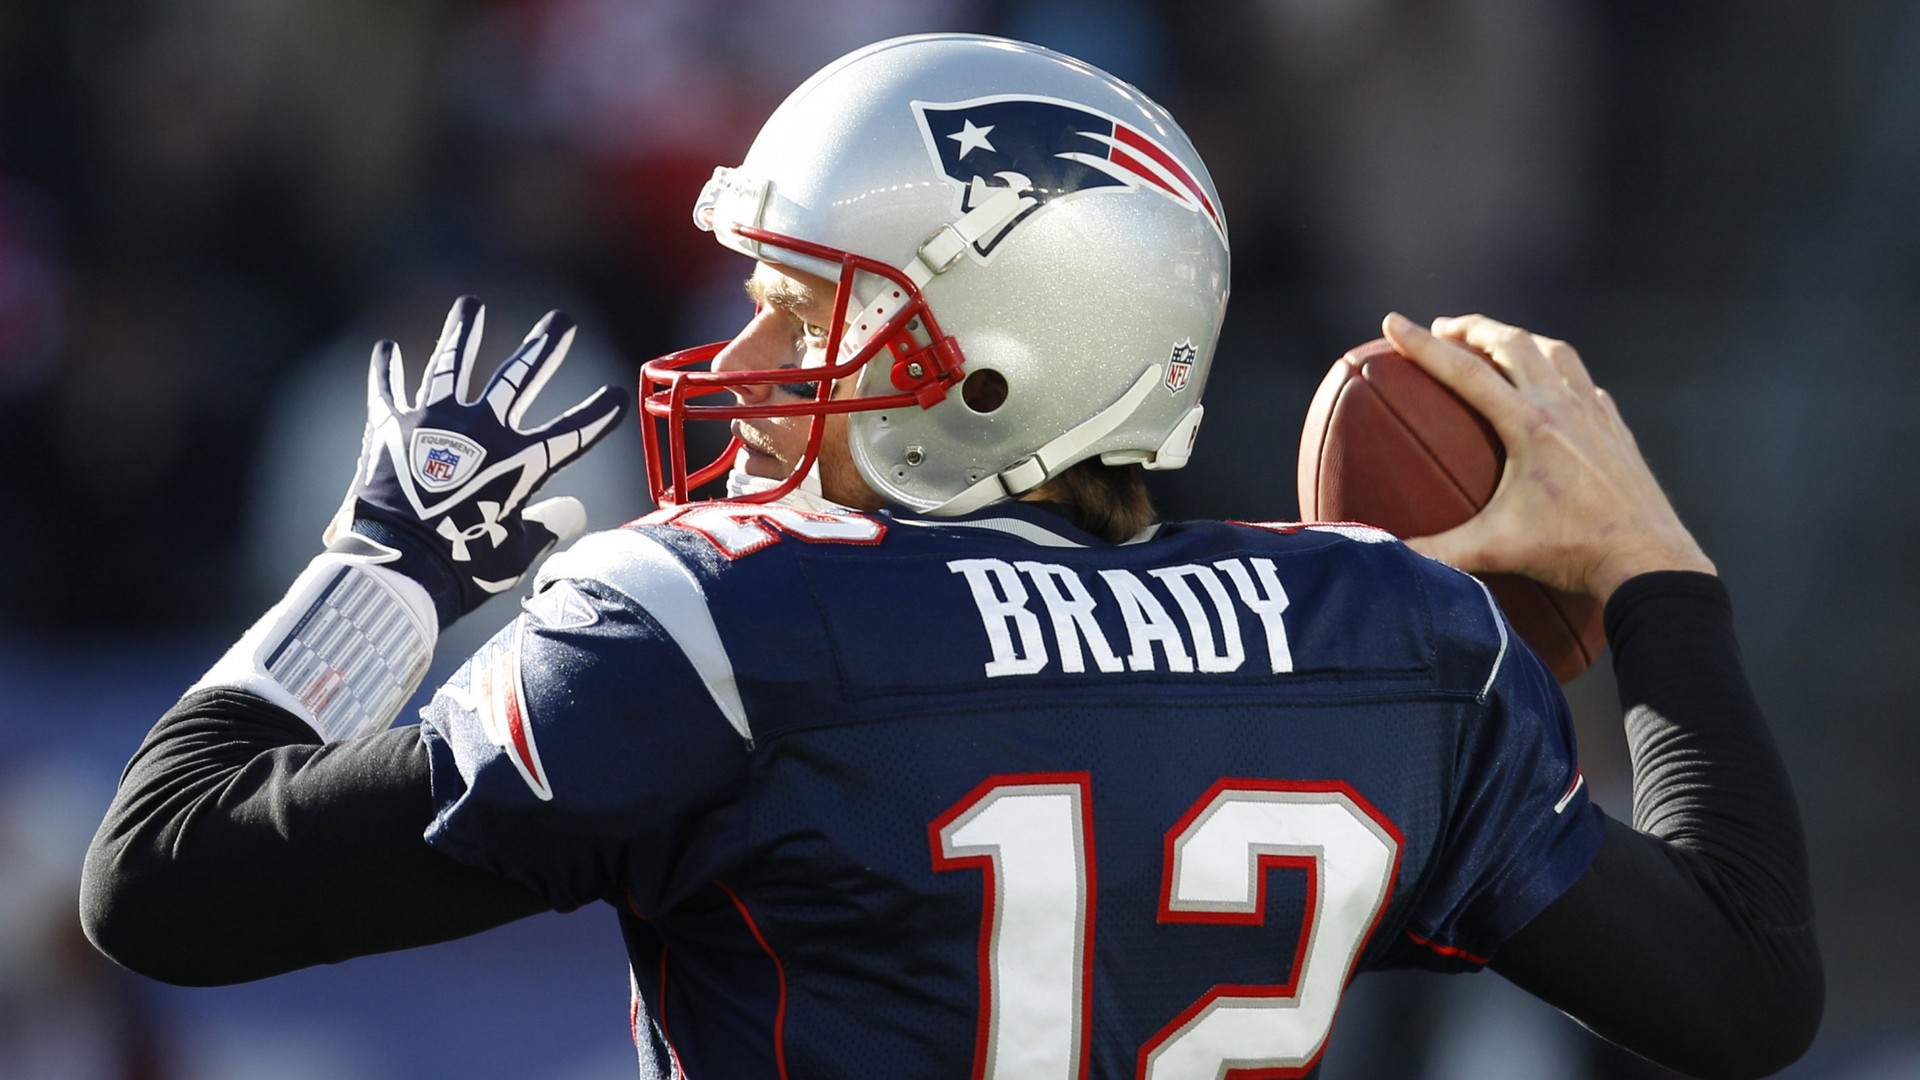 Wallpaper Tom Brady Super Bowl HD With Resolution 1920X1080 pixel. You can make this wallpaper for your Desktop Computer Backgrounds, Mac Wallpapers, Android Lock screen or iPhone Screensavers